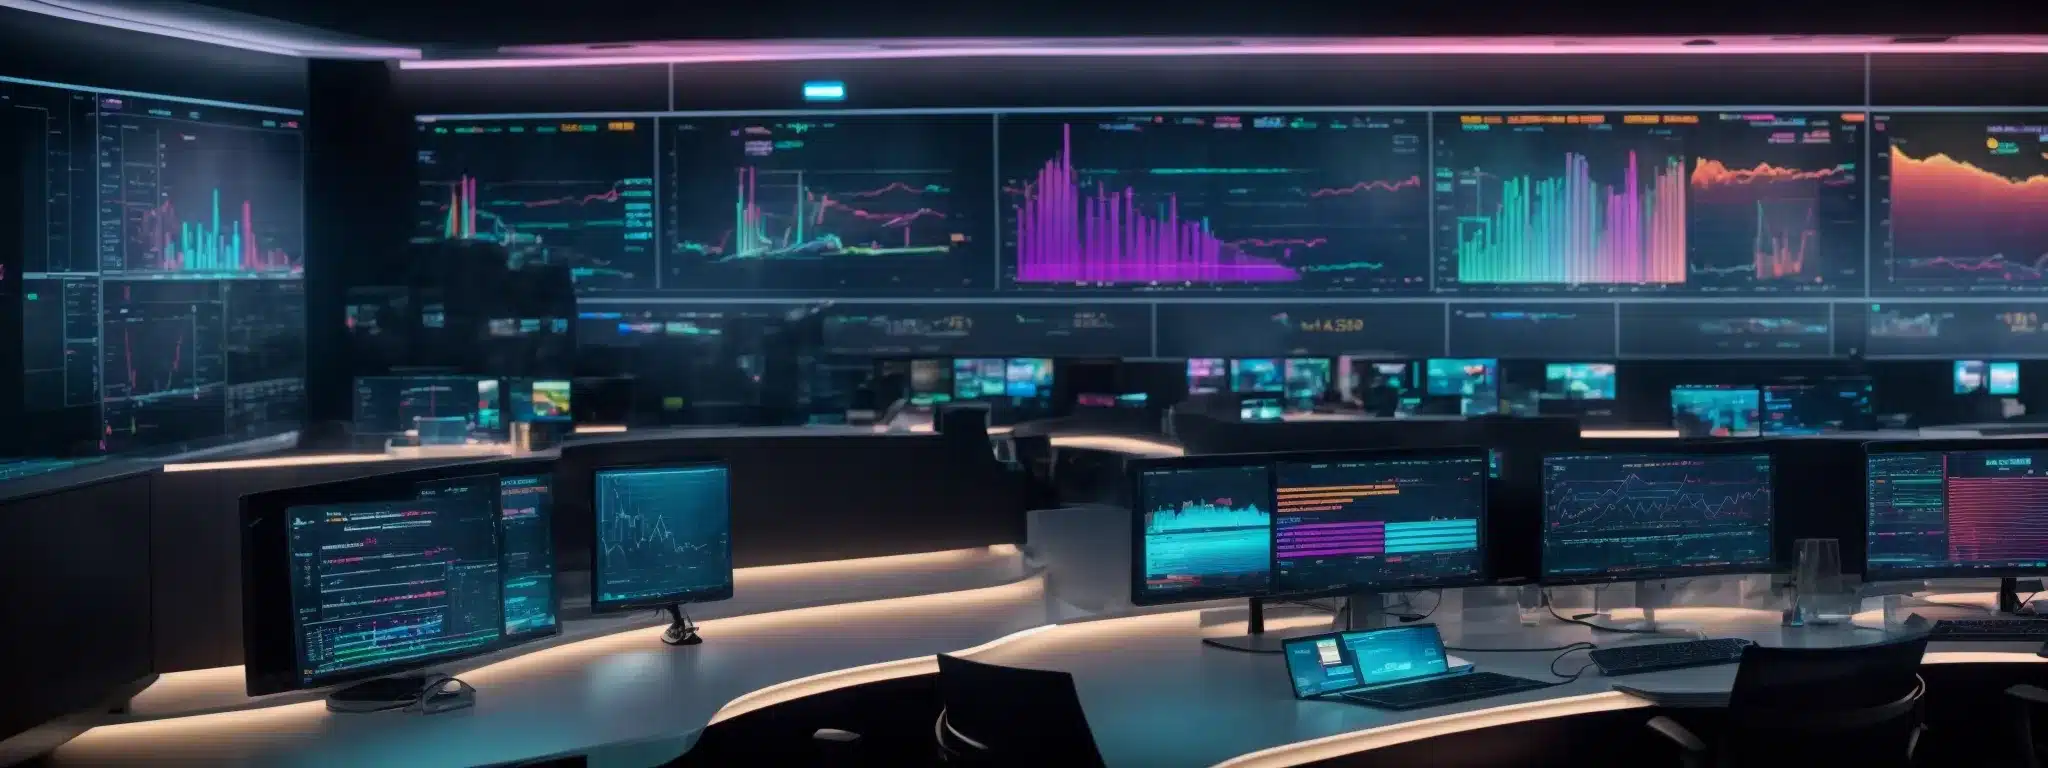 A Futuristic Marketing Command Center With Multiple Screens Displaying Colorful Data Visualizations And Interactive Marketing Dashboards.